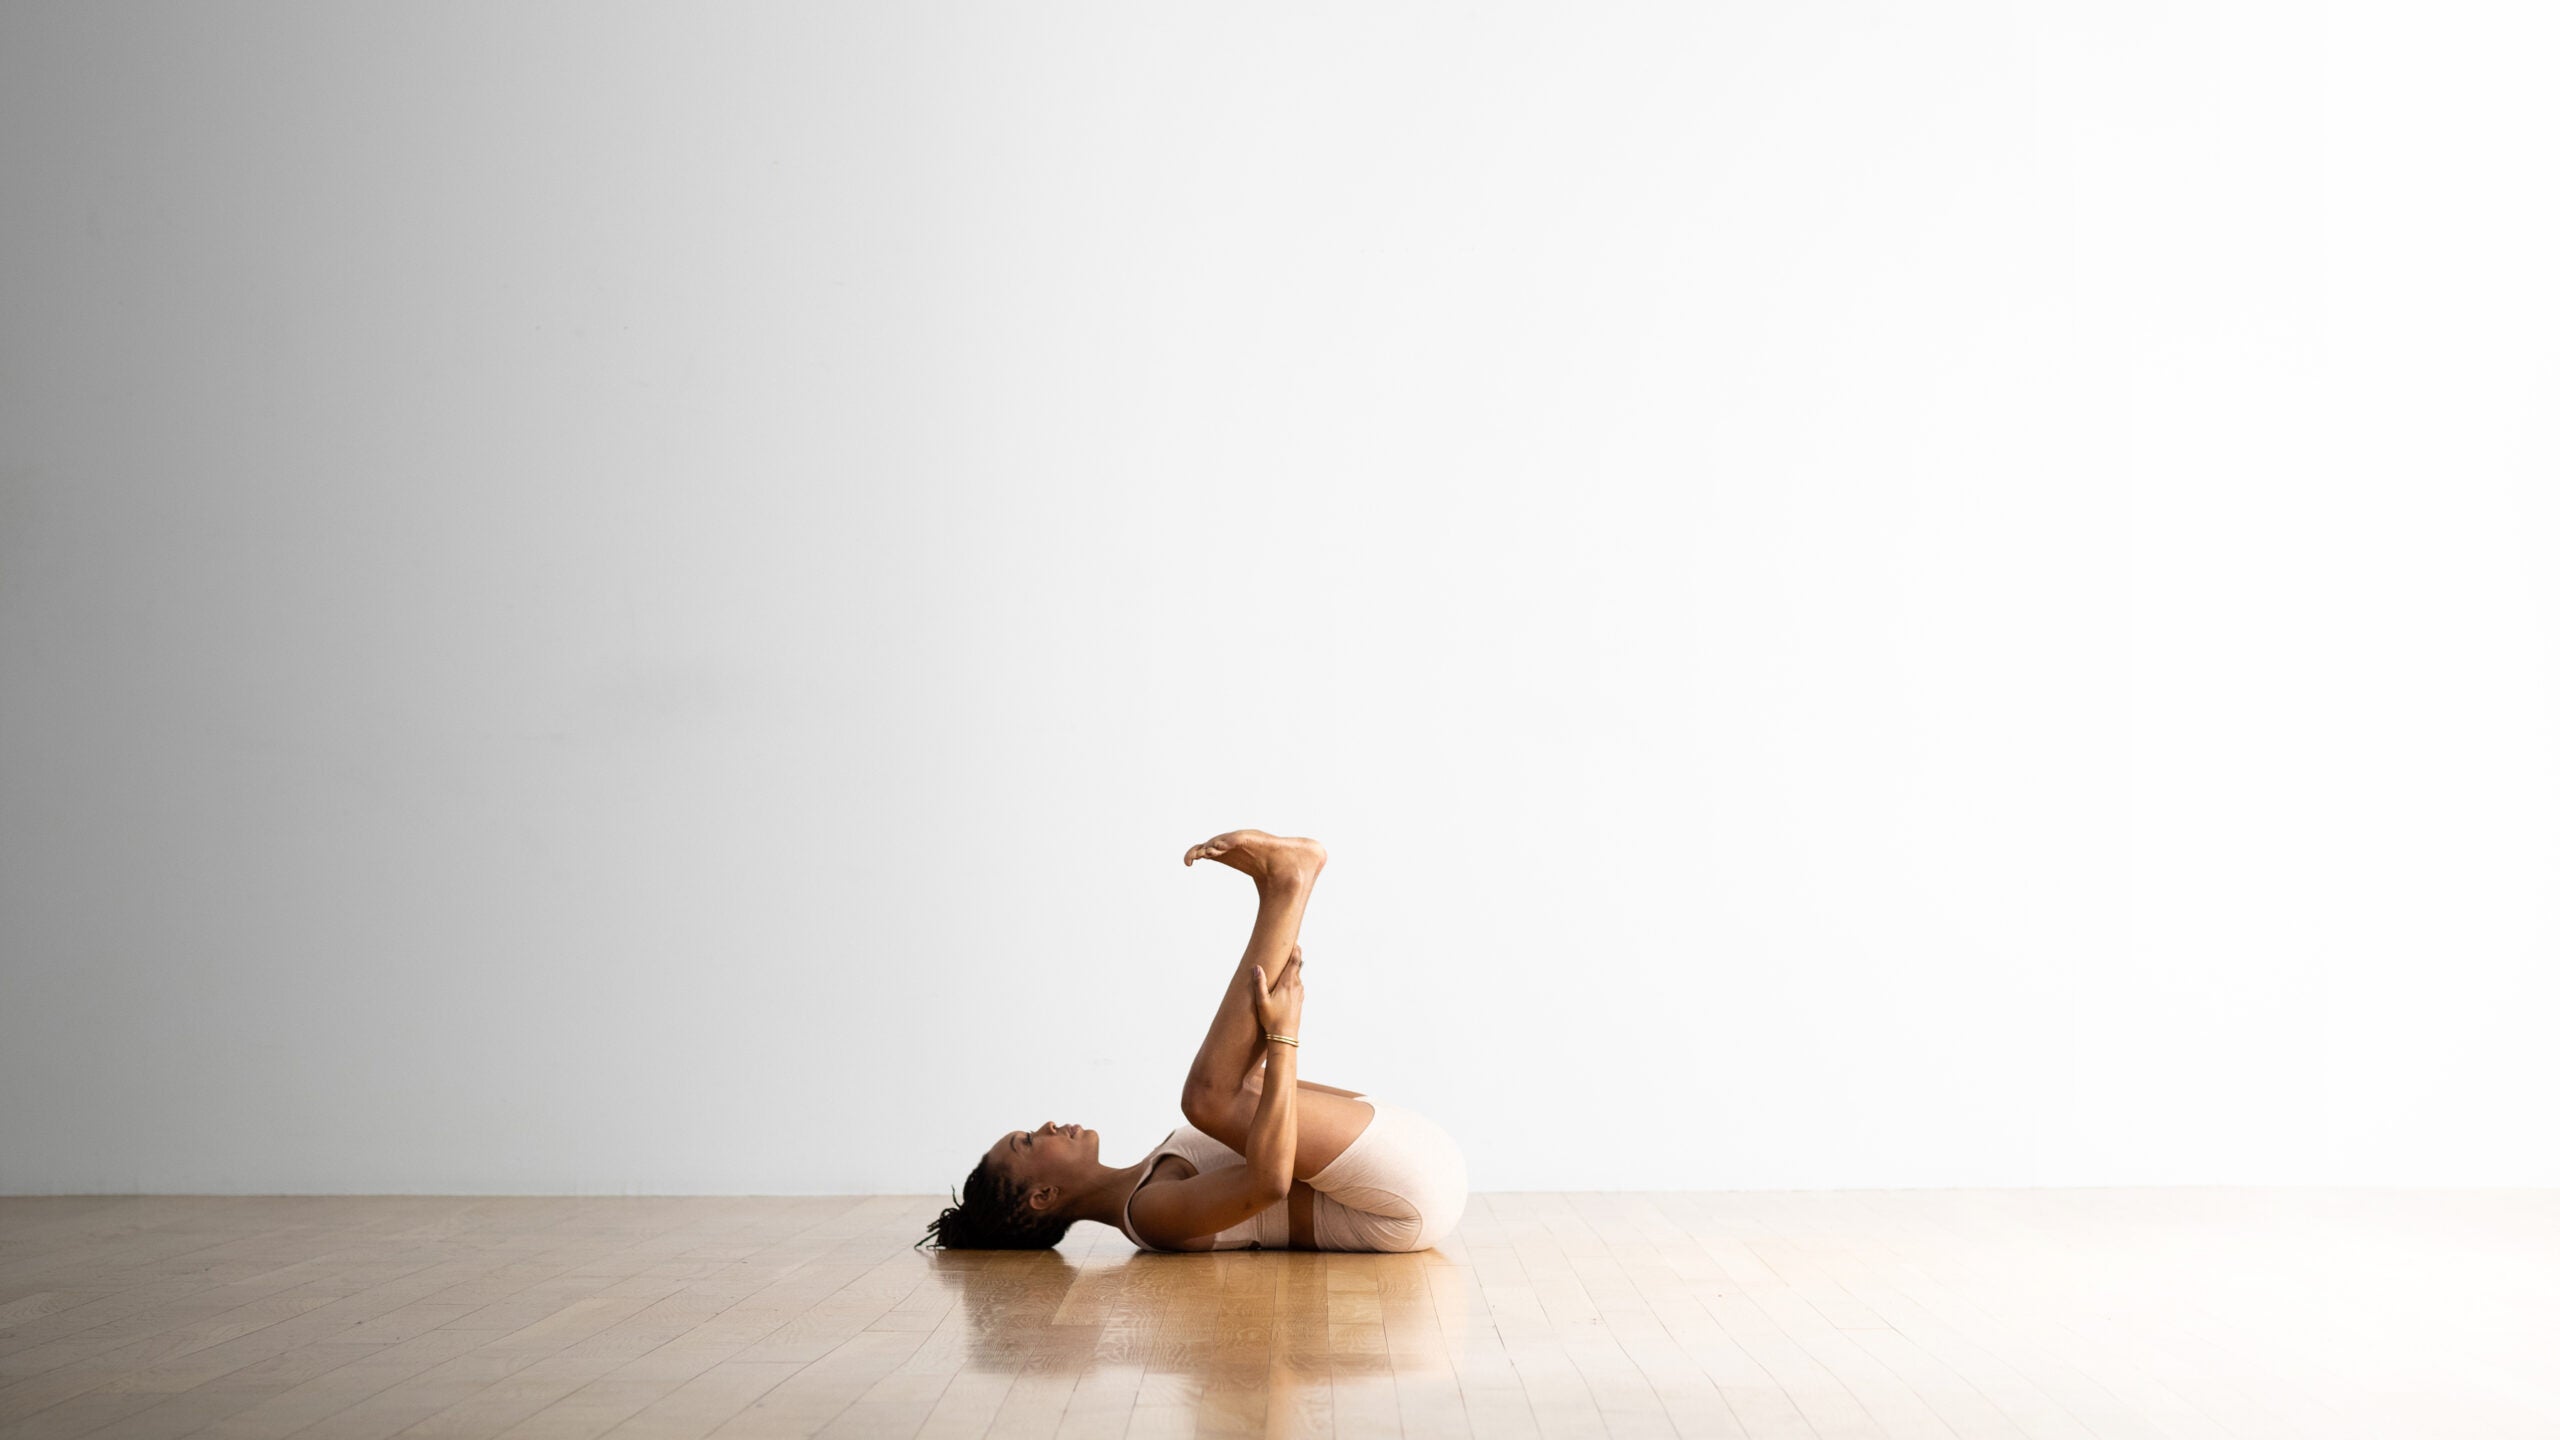 A yoga teacher practices a variation of Happy Baby Pose by putting her hands behind her calves instead of gripping the outside edge of her feet. She is a Black woman wearing light colored yoga shorts and a matching top. She is in a white room with a wood floor.